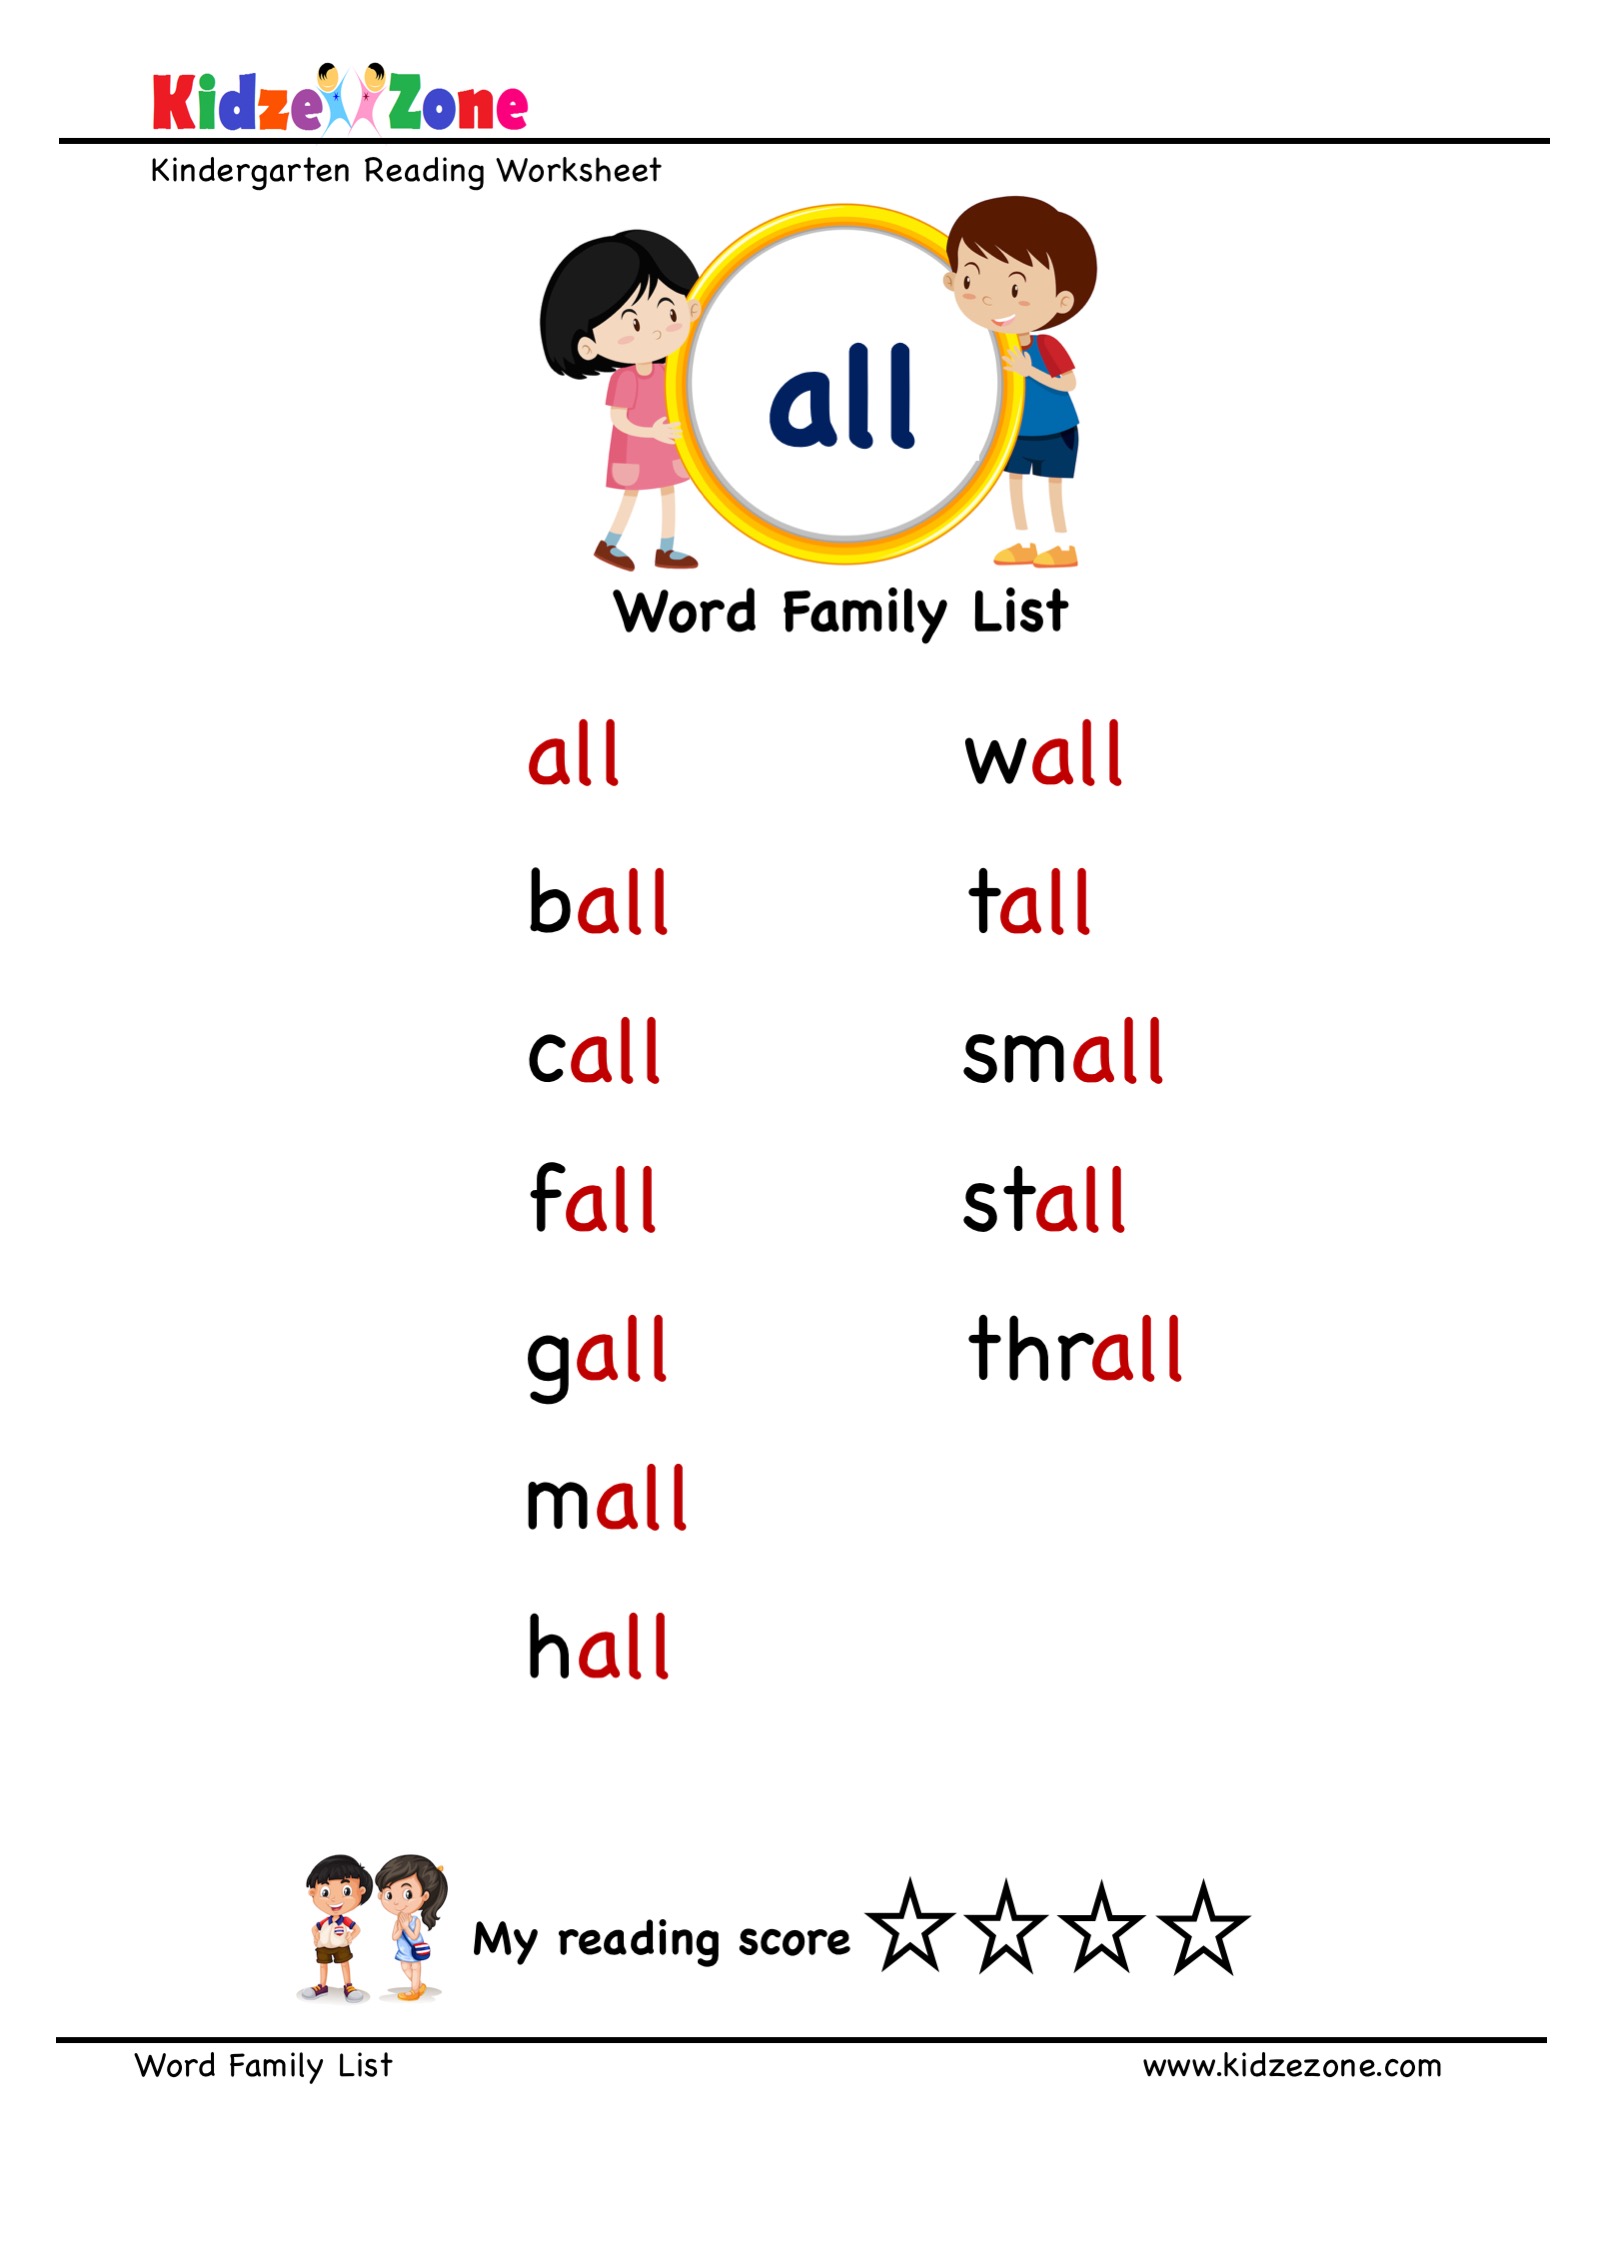 Explore and learn words from "all" word family